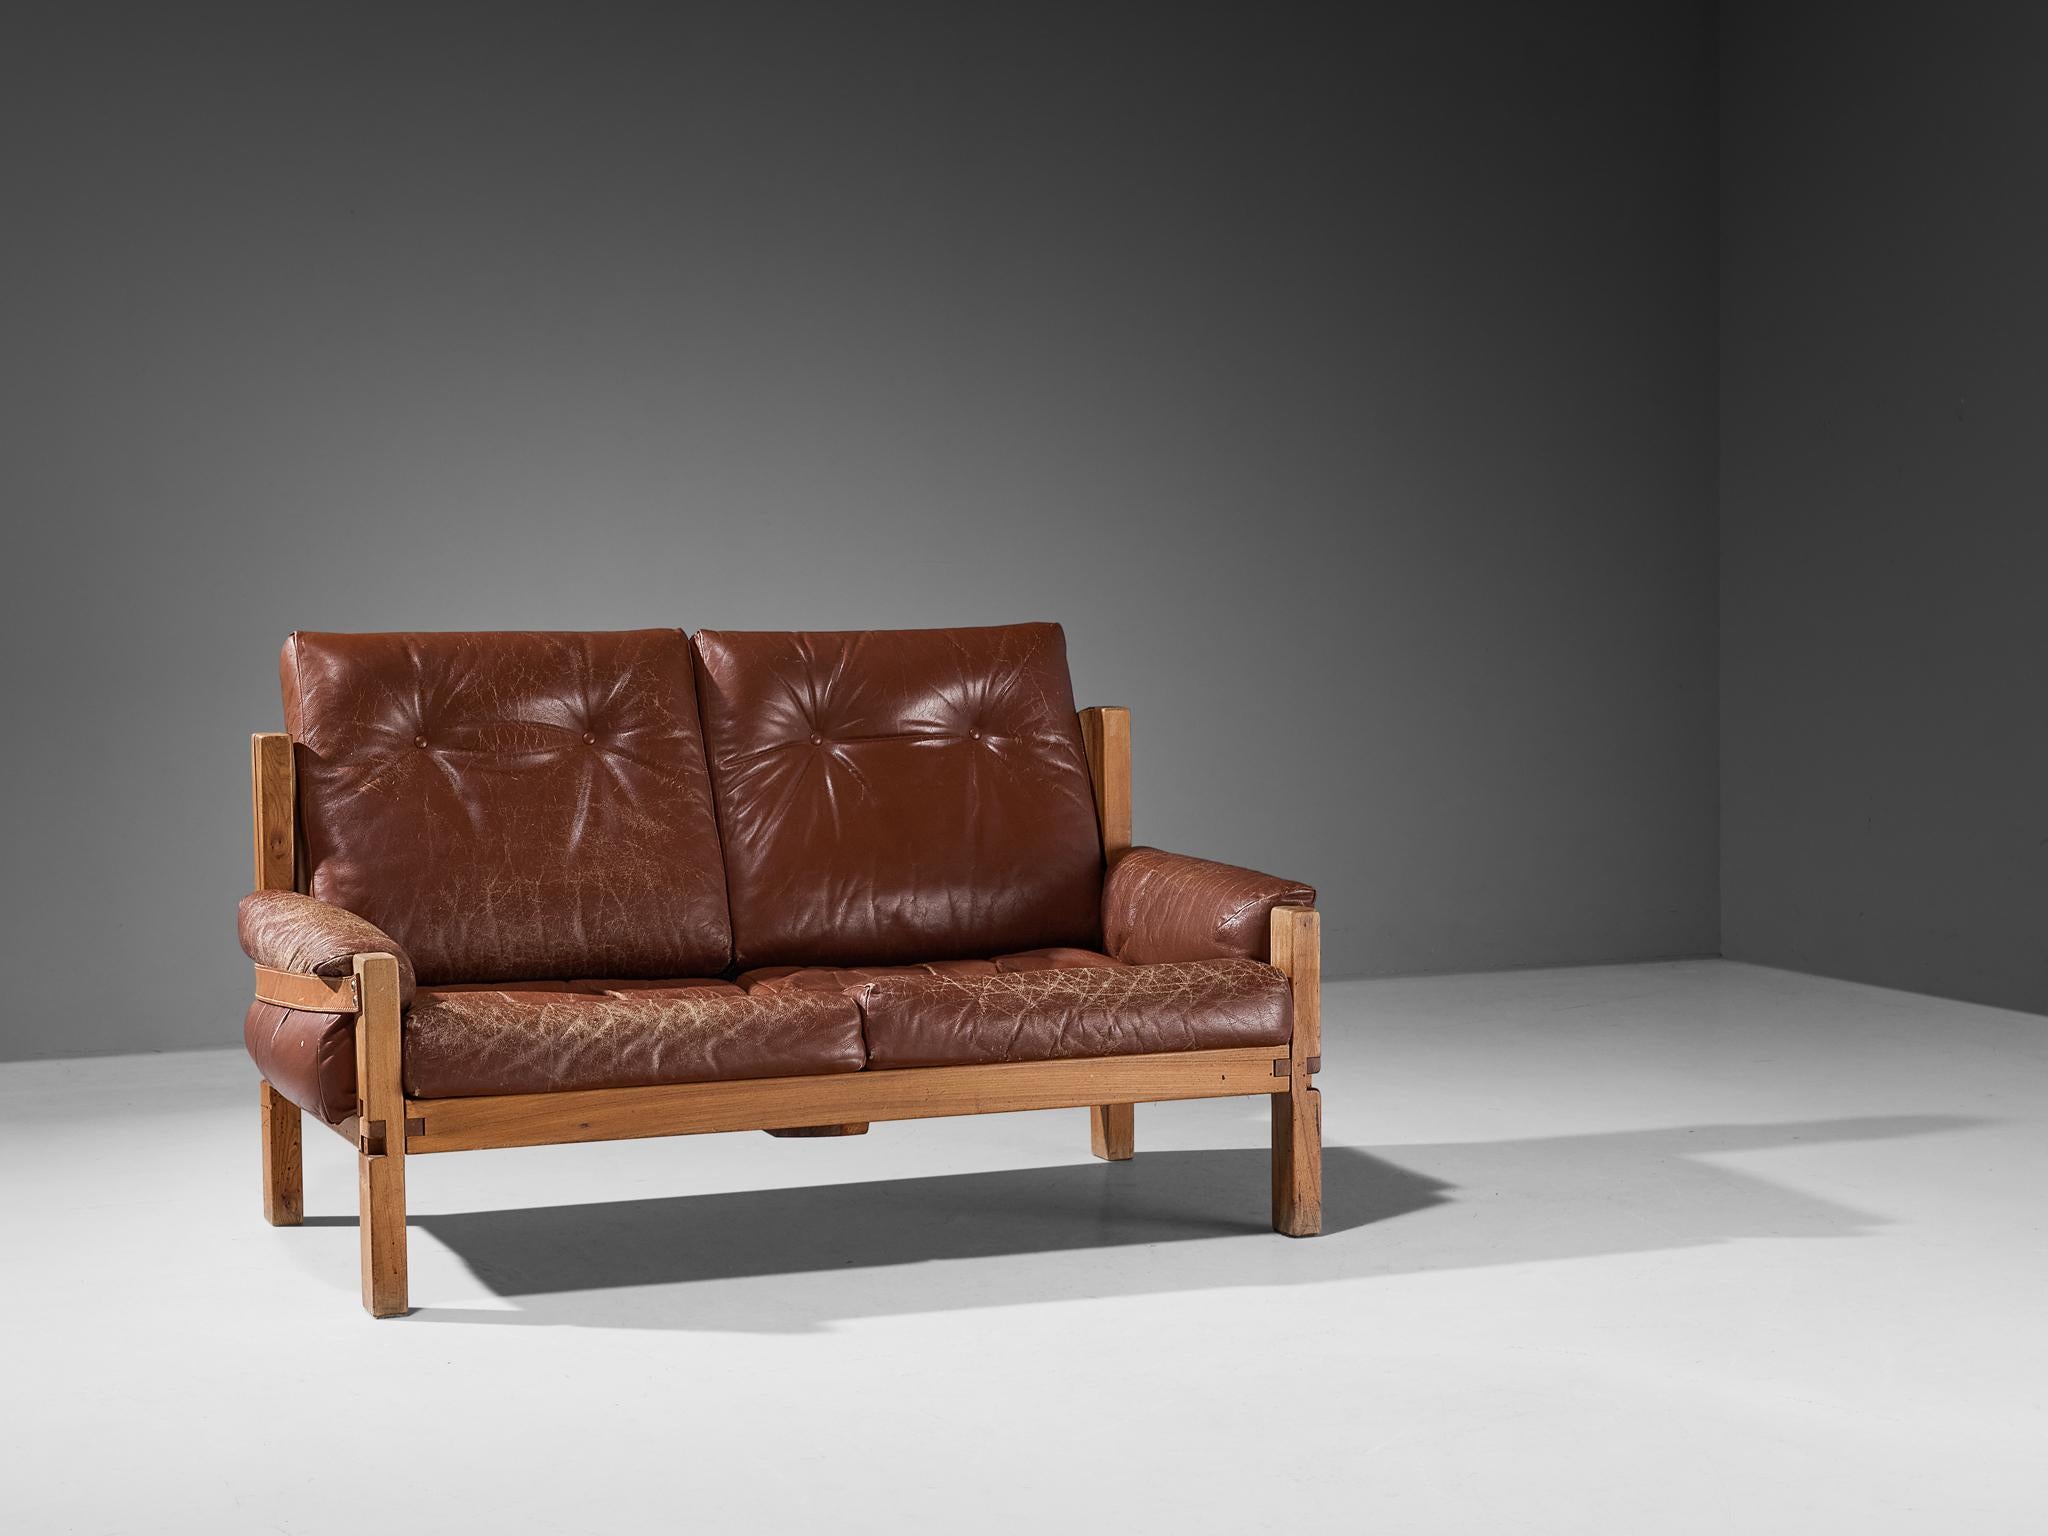 Pierre Chapo, 'S22' sofa, elm, leather, France, design 1967

This design is an early edition. Comfortable and recognisable two seat sofa designed by Pierre Chapo in elm and brown leather. Inspired by the design of the 'S15' lounge chair, Chapo